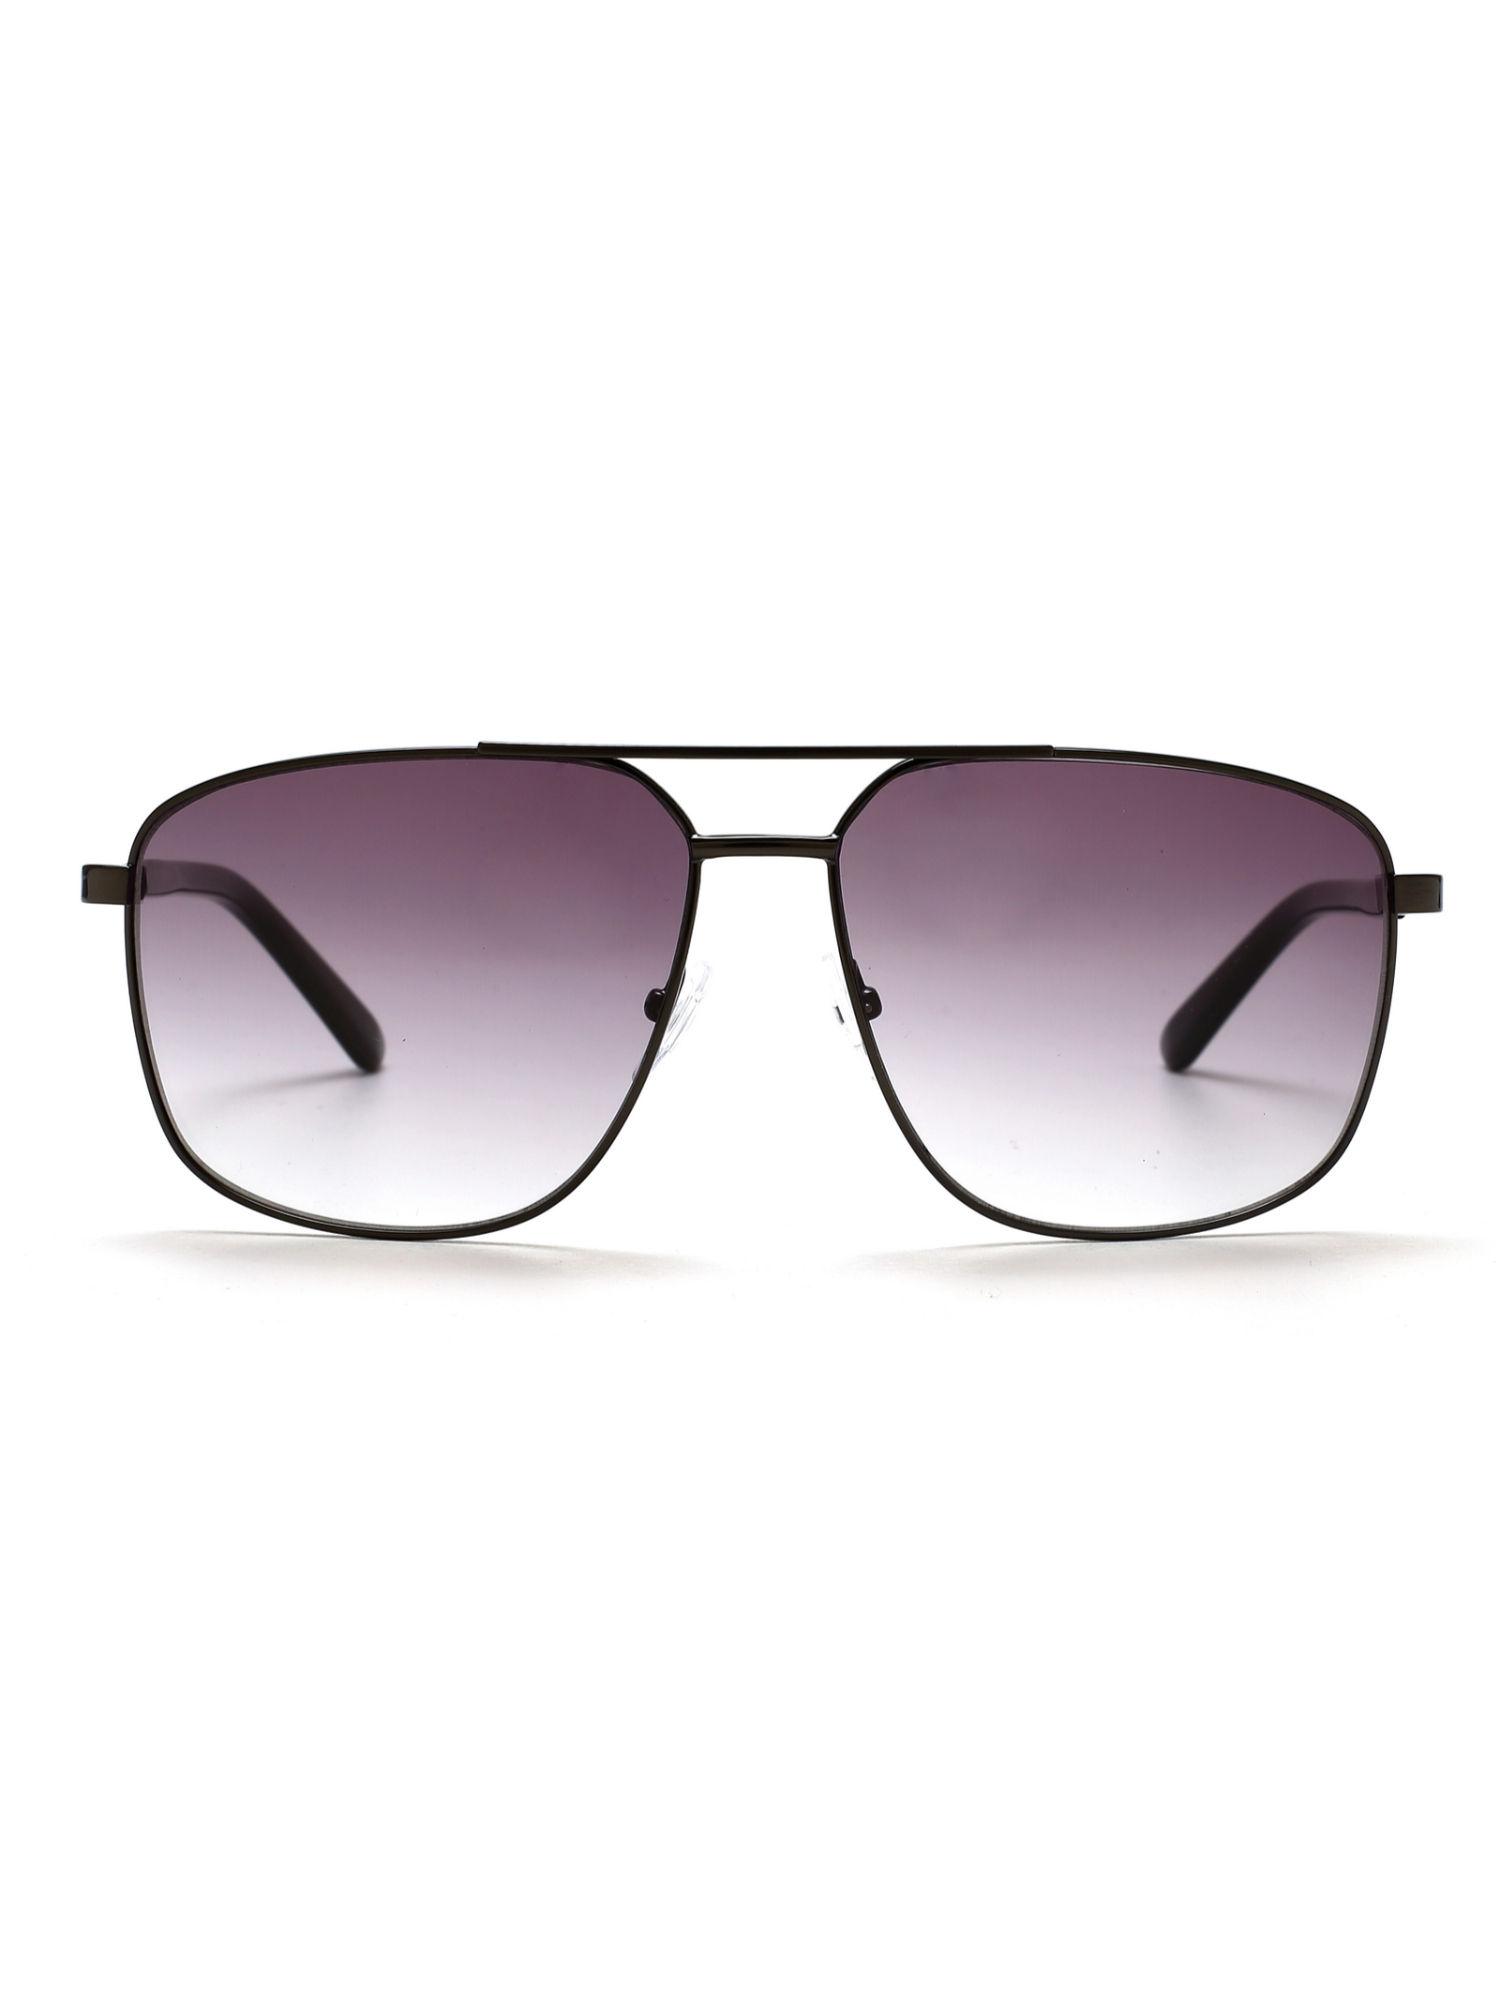 rectangle-sunglasses-with-blue-lens-for-men